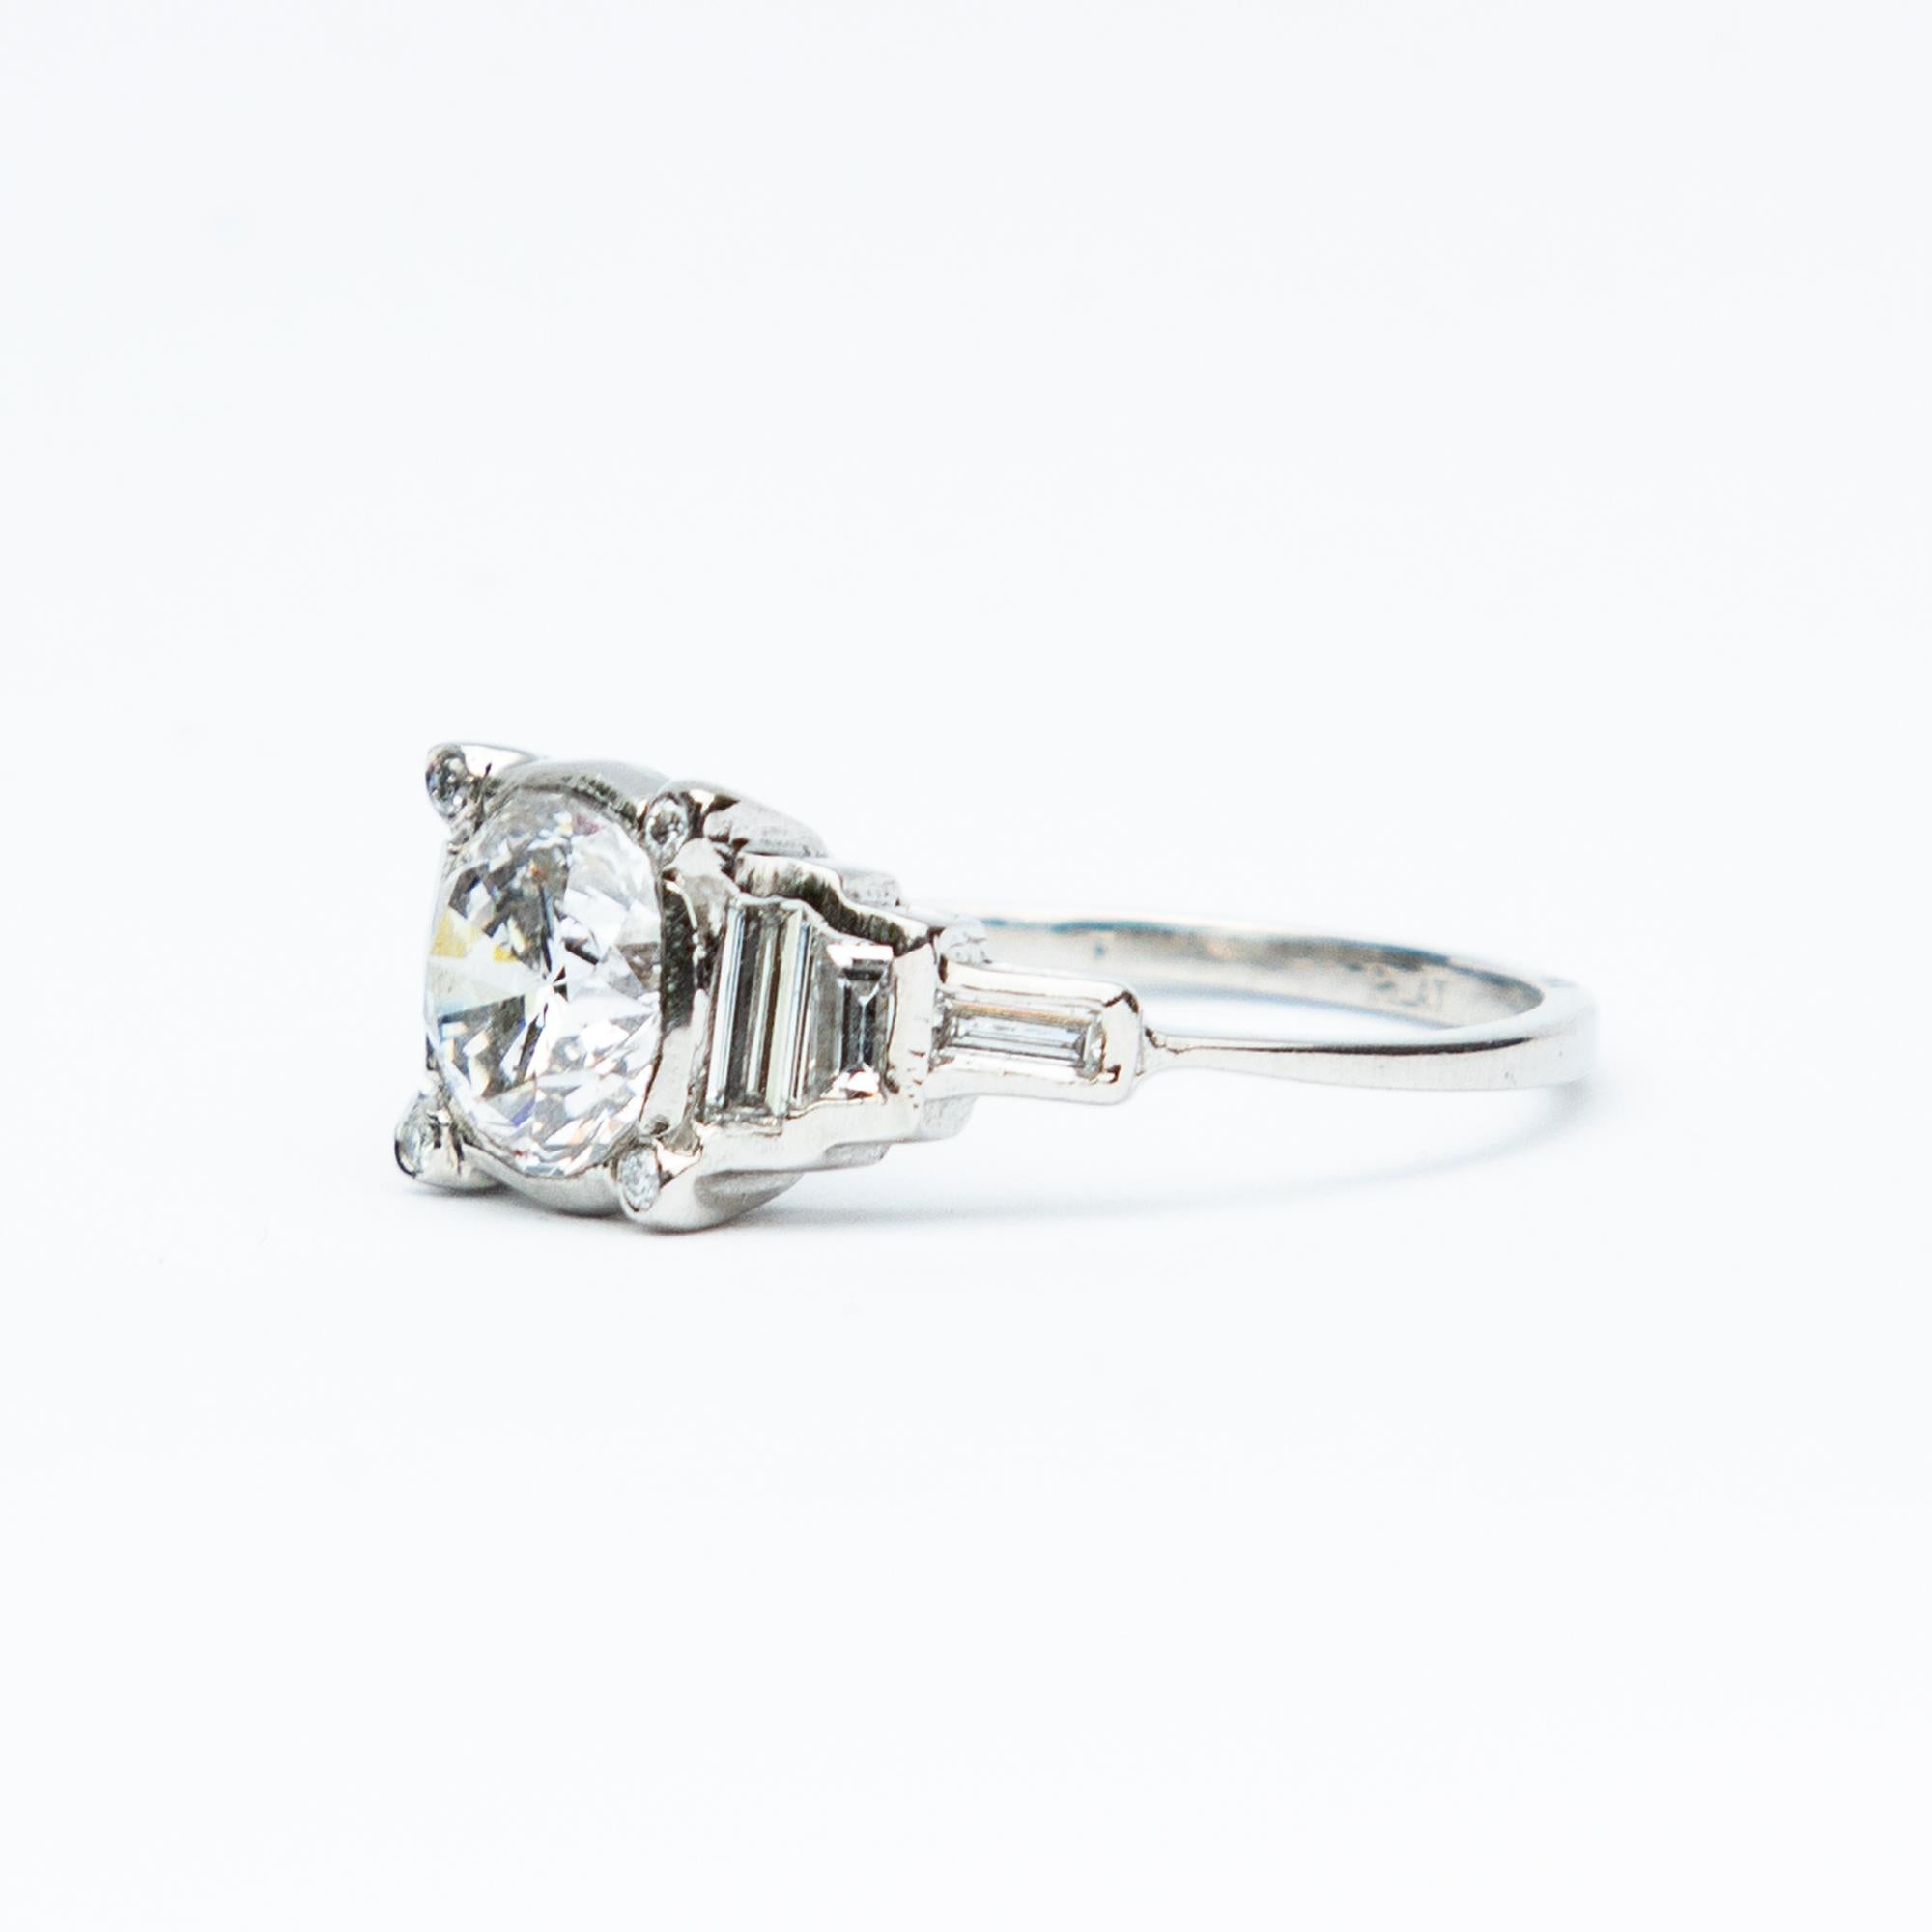 This a perfect example of a stunning Art Deco solitaire platinum and diamond ring. The central cushion cut Diamond measures one carat twenty, beautifully complimented with baguette cut diamond shoulders.
Total diamond weight certified 2.15 carat, G